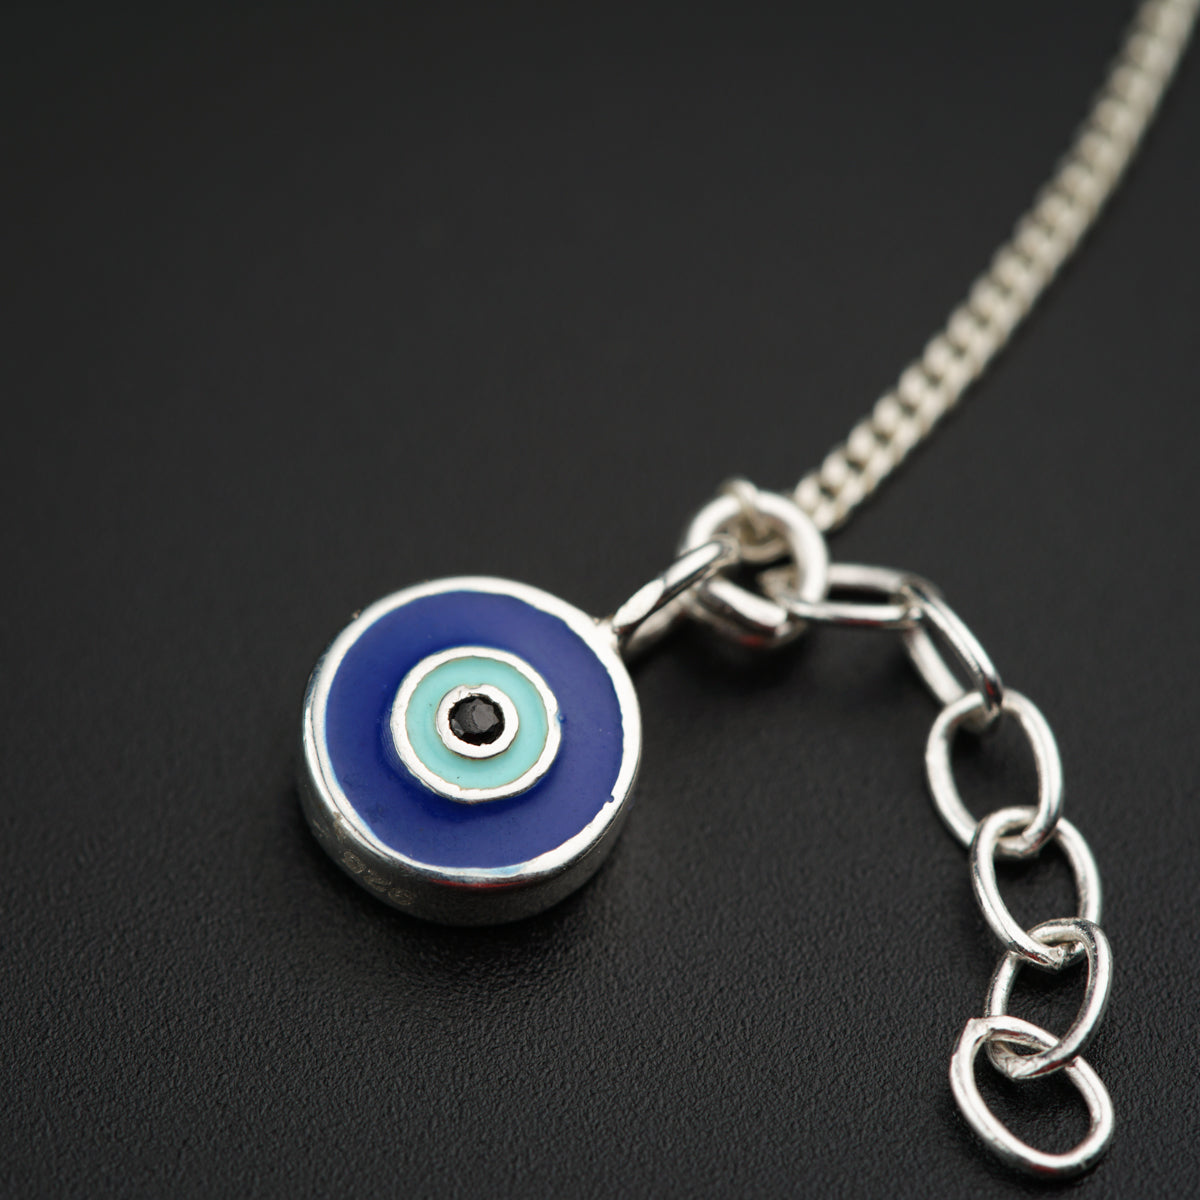 a blue and white evil eye charm on a chain